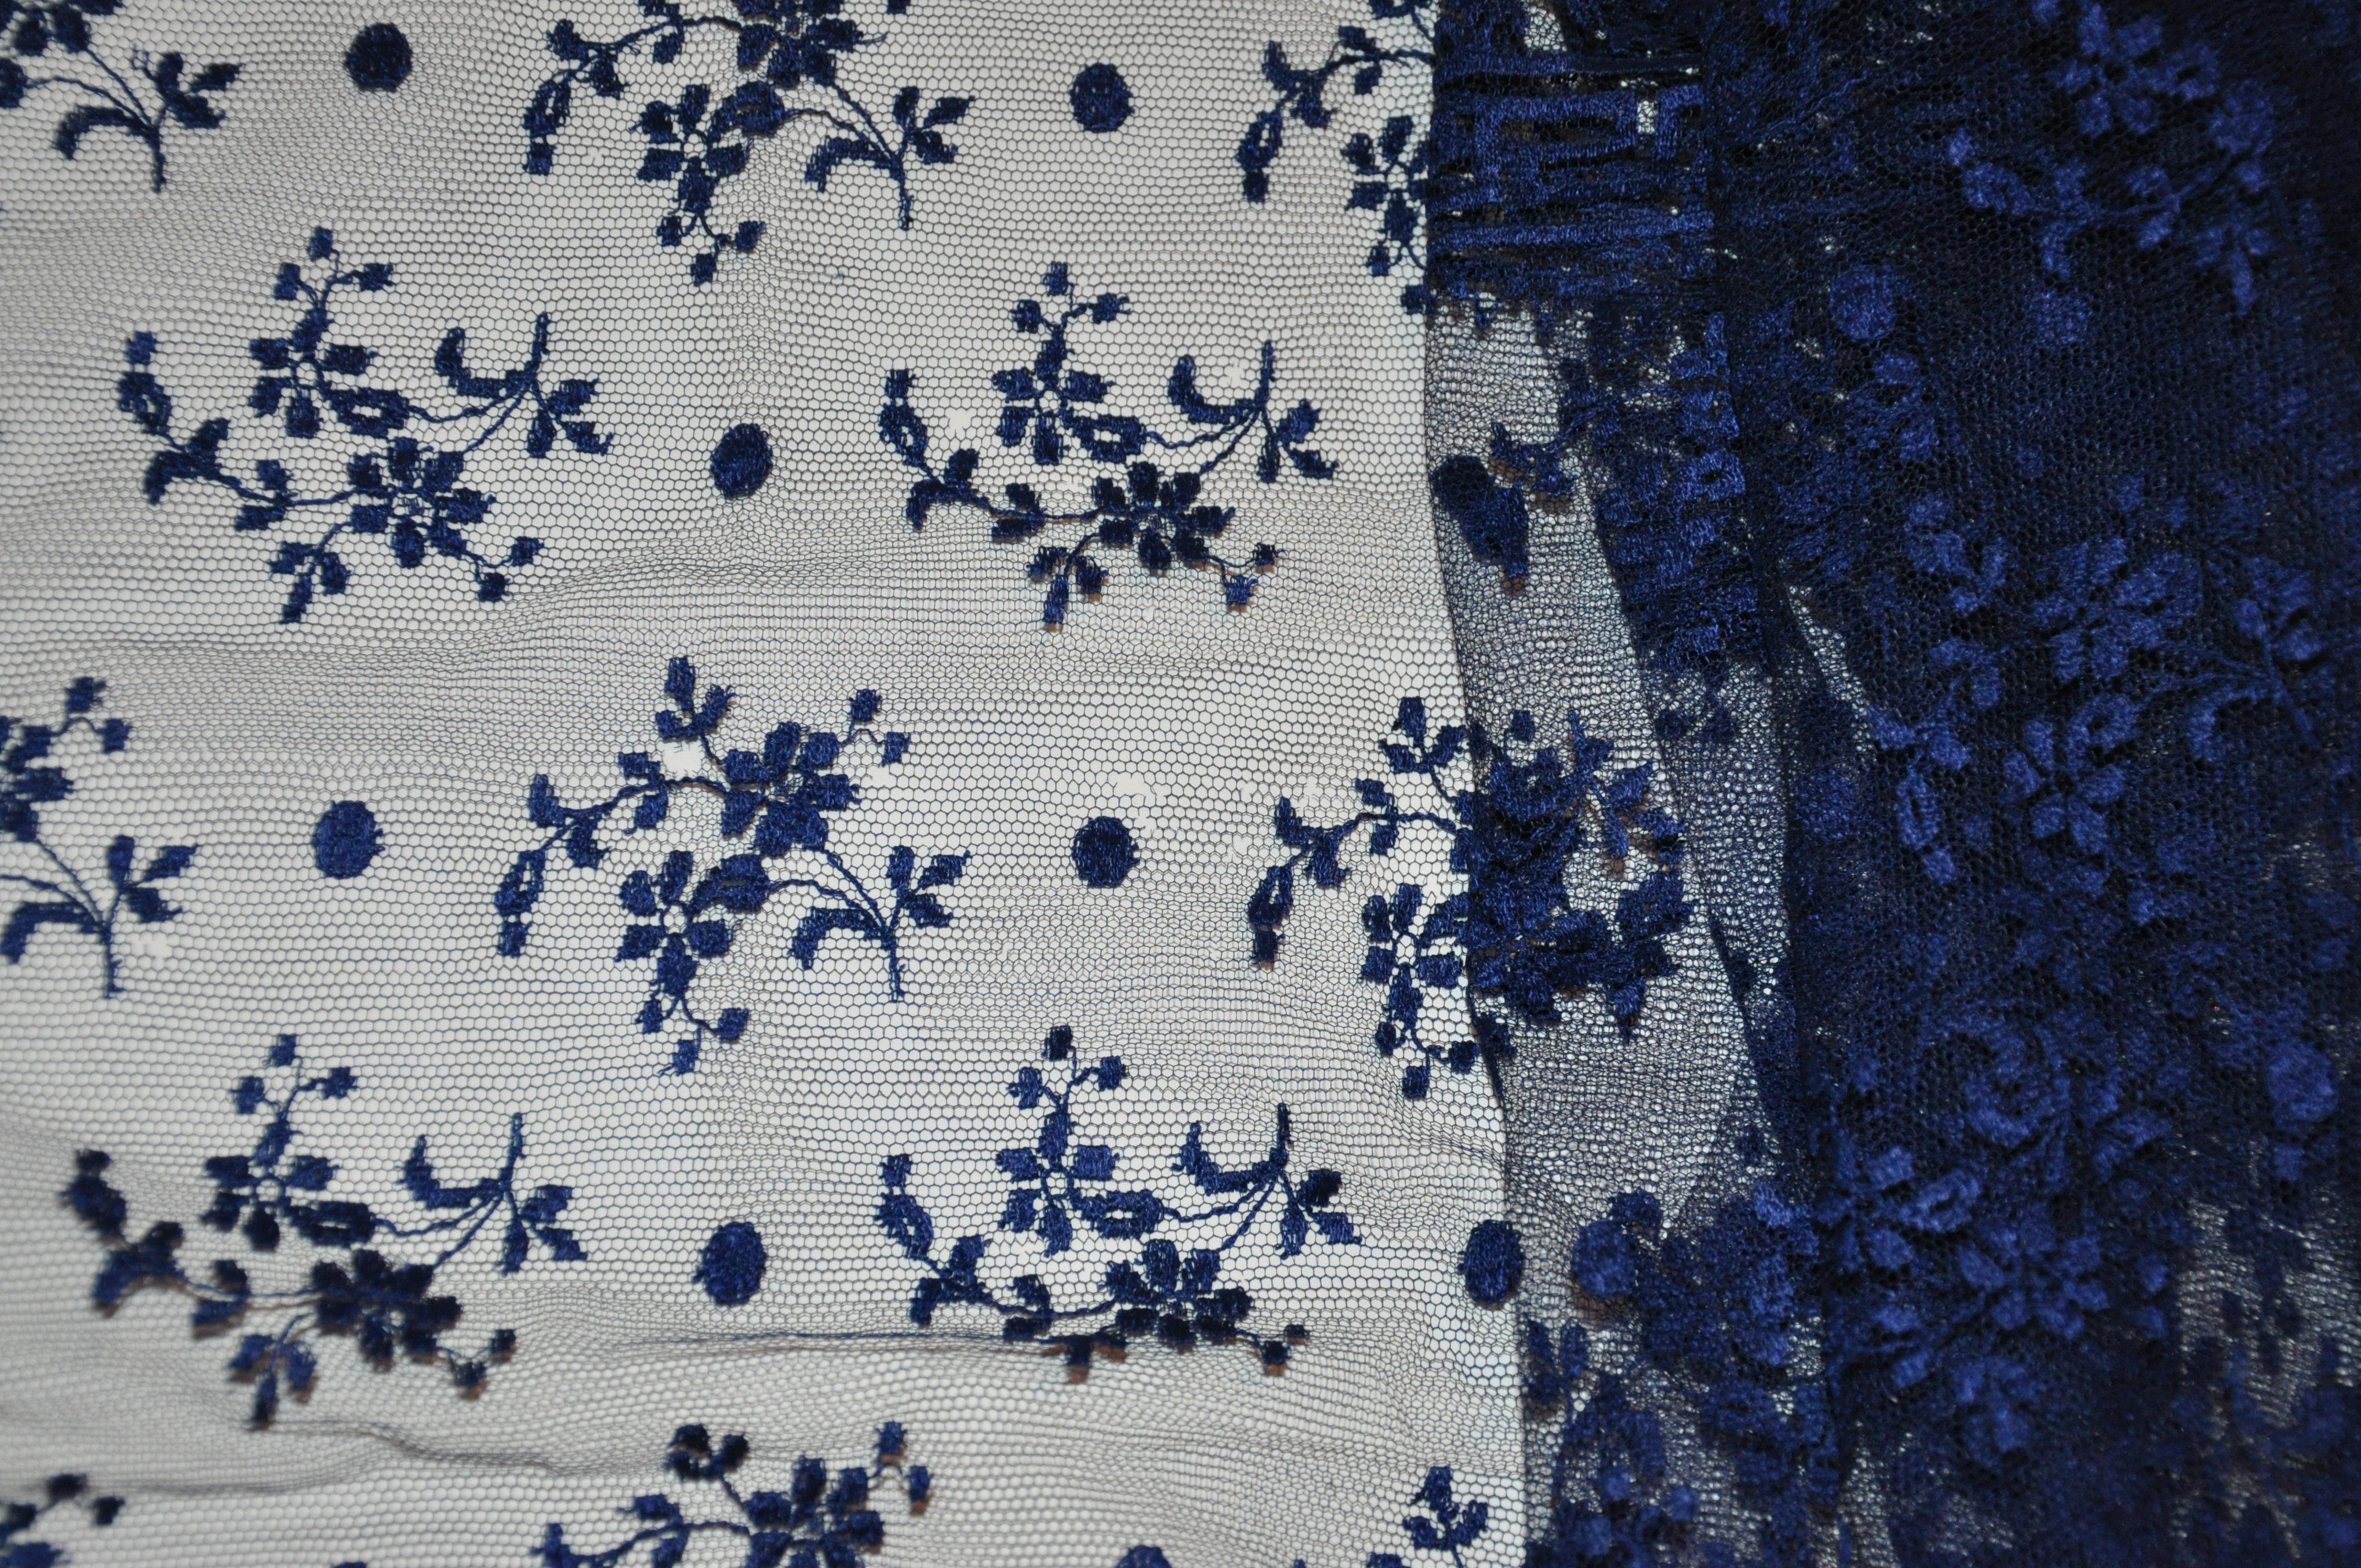 Women's or Men's Midnight Blue Large Hand-Woven French Lace Floral with Scallop Edges Shawl